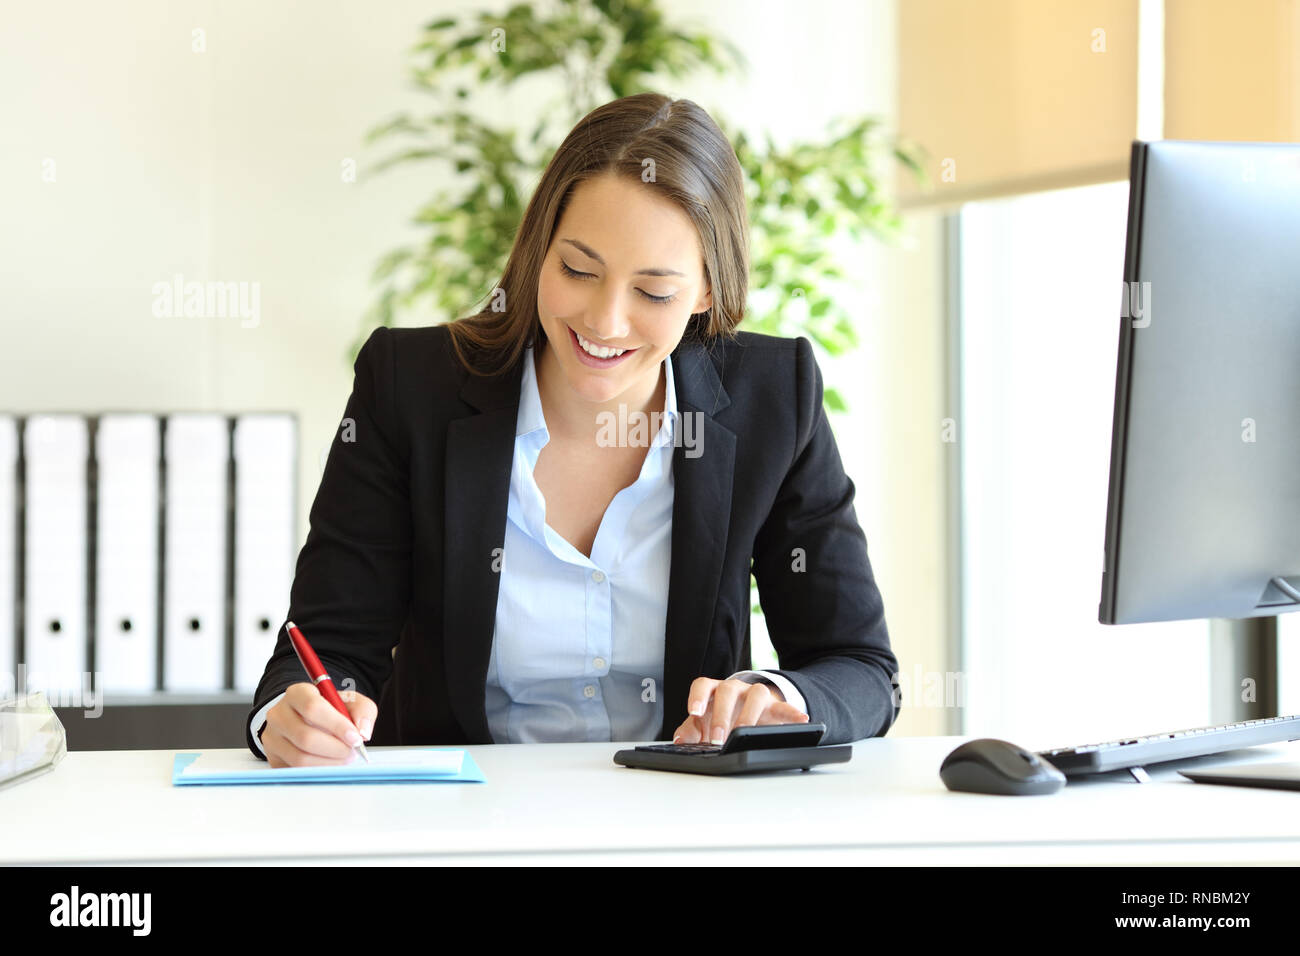 Office worker calculating budget using calculator and writing on a document Stock Photo